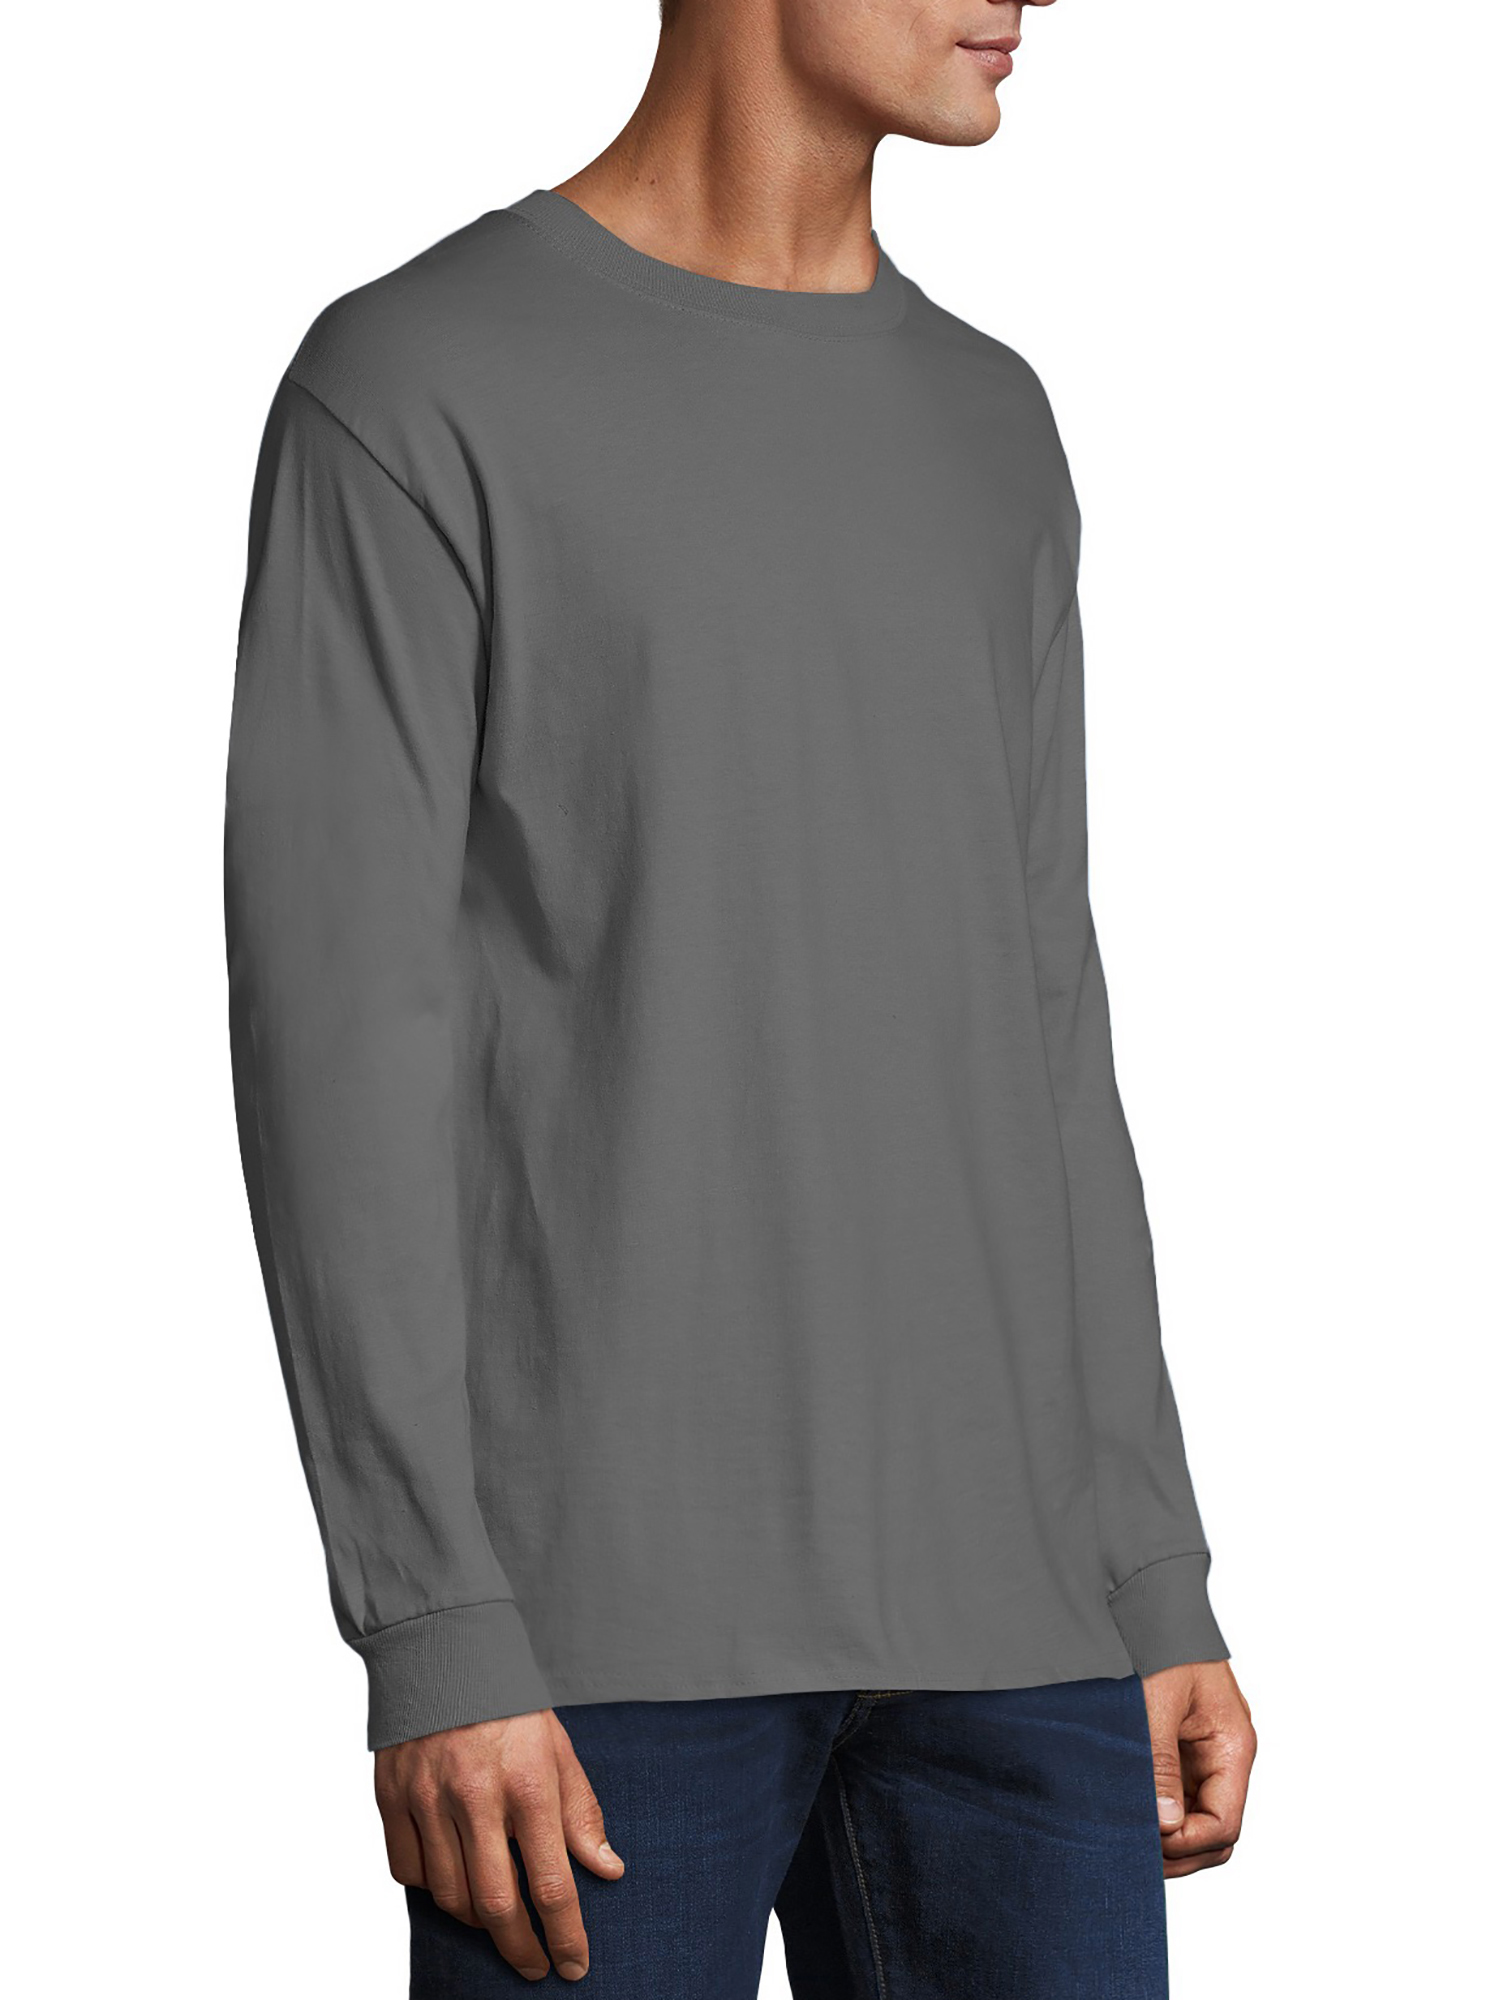 Hanes Men's and Big Men's Premium Beefy-T Long Sleeve T-Shirt, Up To 3XL - image 3 of 6